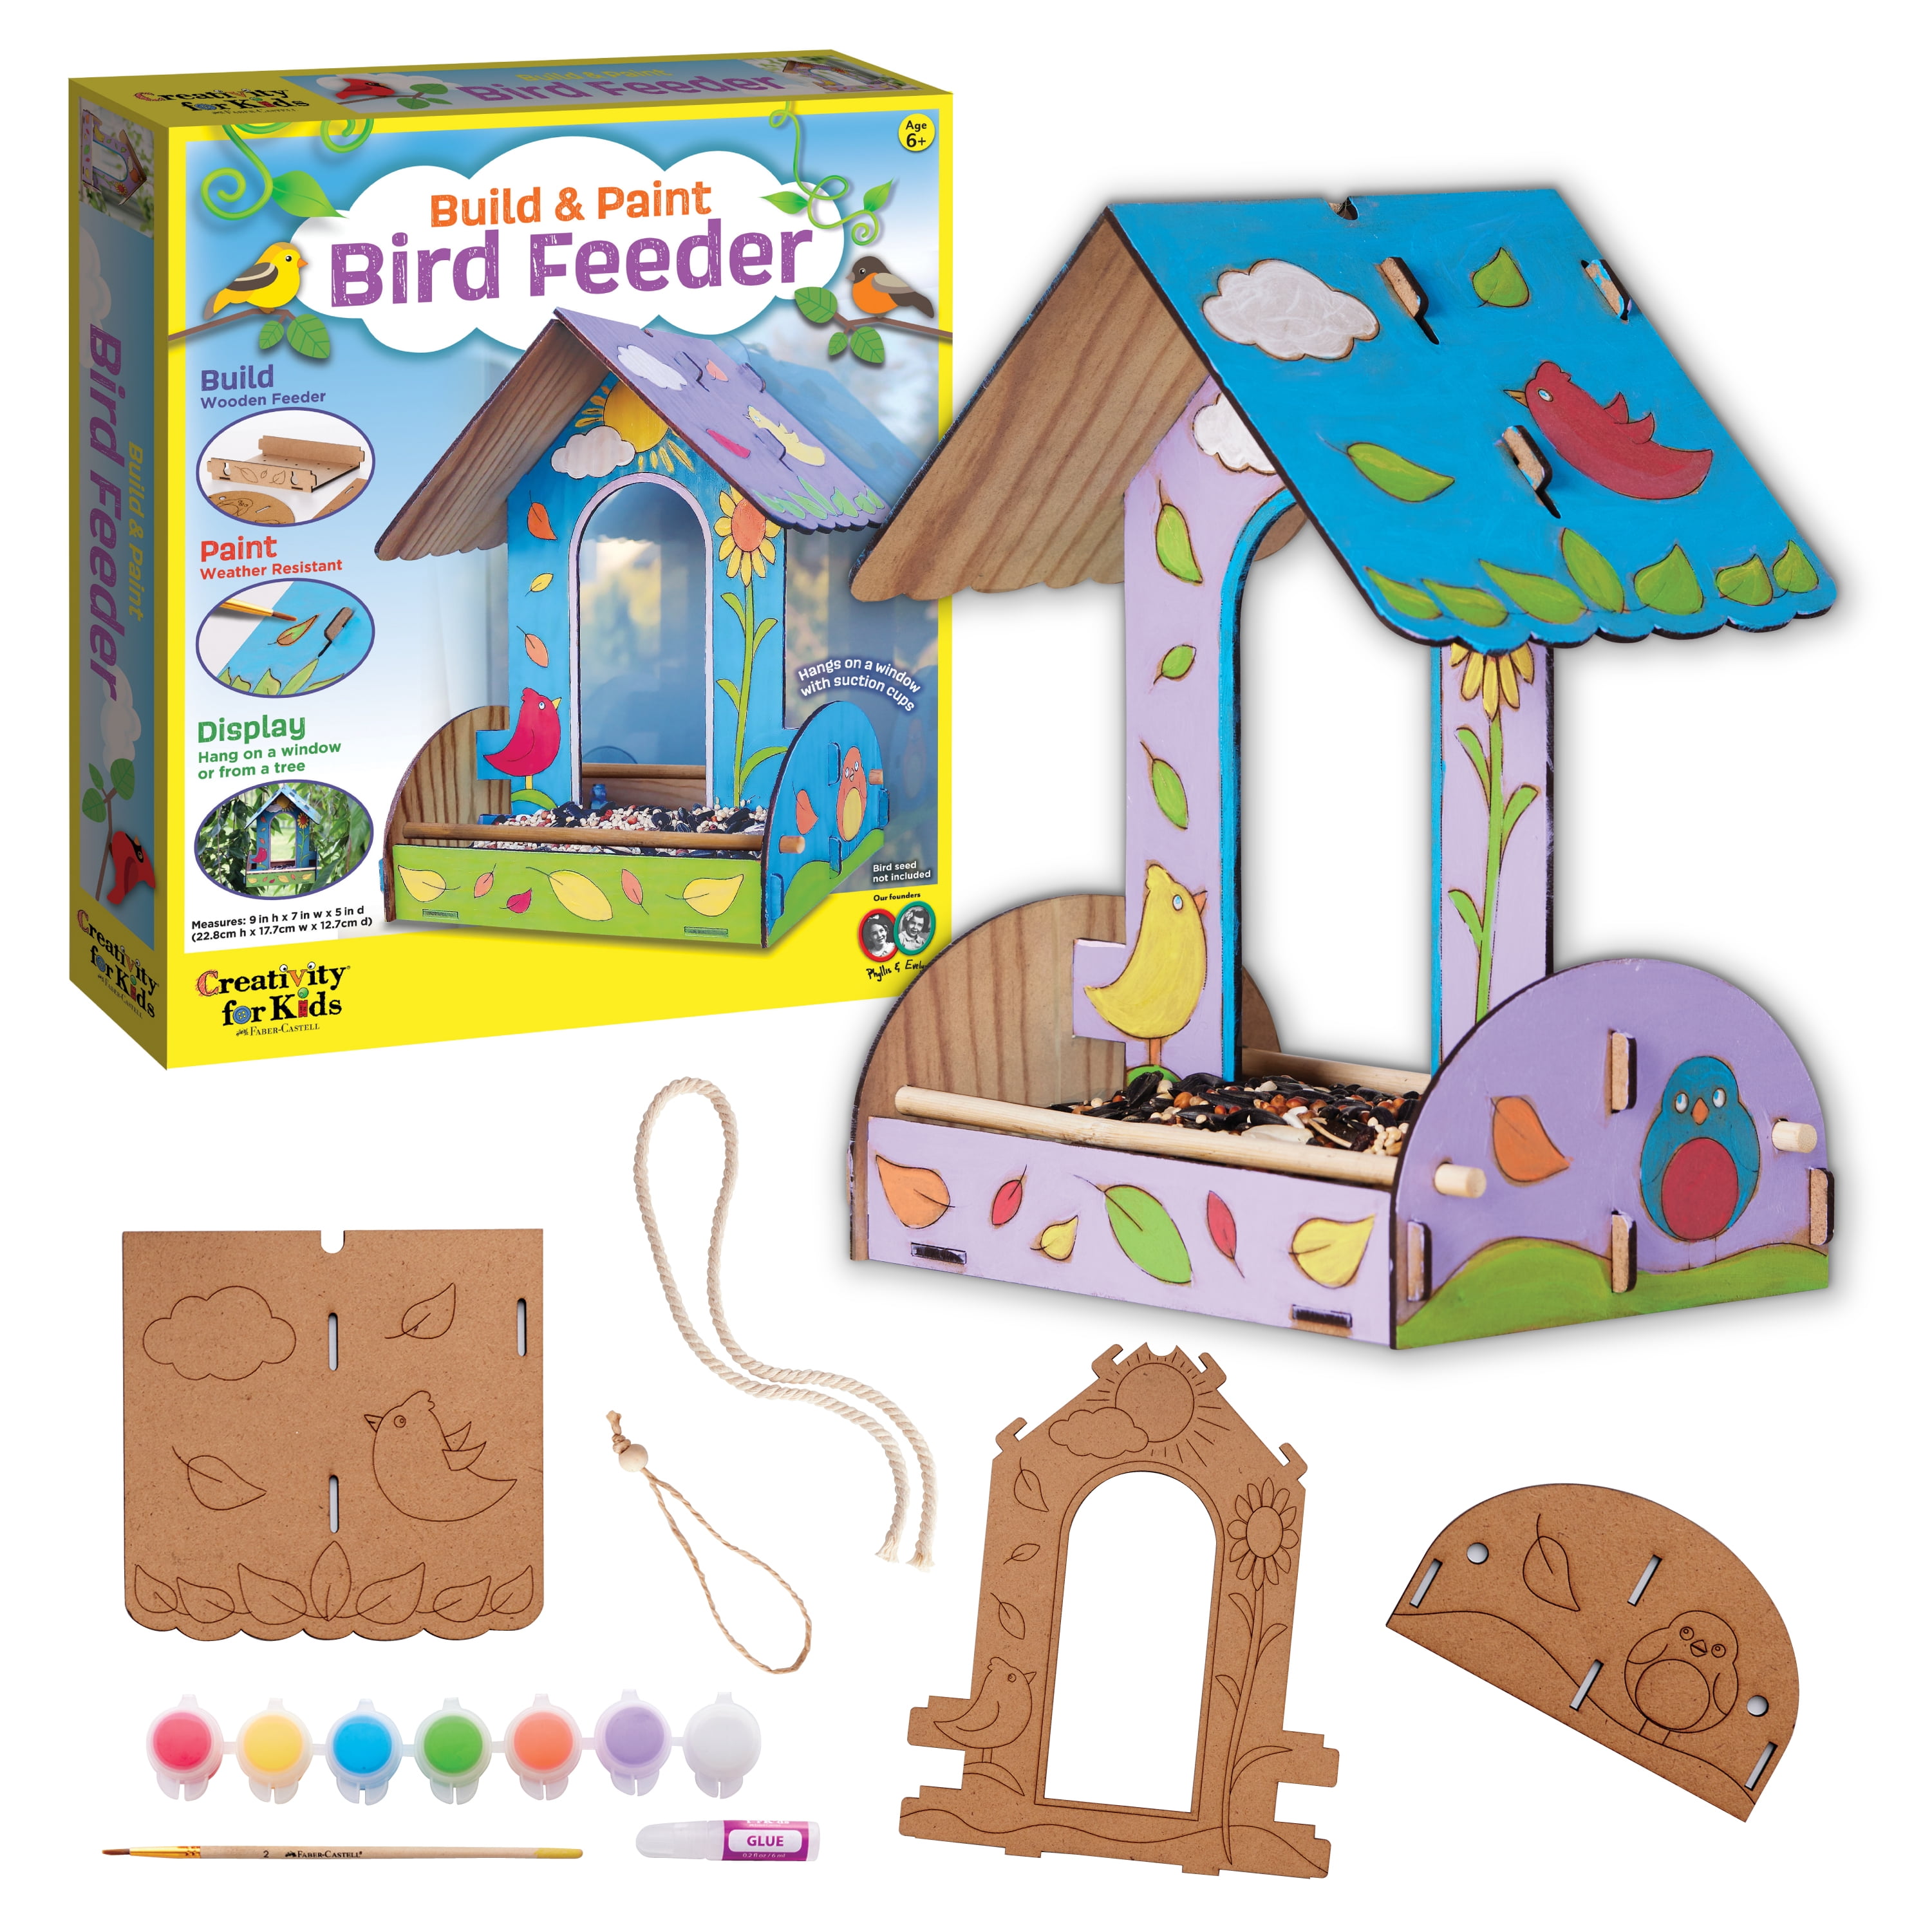 Upgraded Bird Feeders Kids Arts and Crafts Kits for Outdoor, 2-Pack STEM Painting  Art Activities Crafts Gifts Outside Toys for Boys Girls Age 8-12 4-6 6-8 3-5  - Coupon Codes, Promo Codes